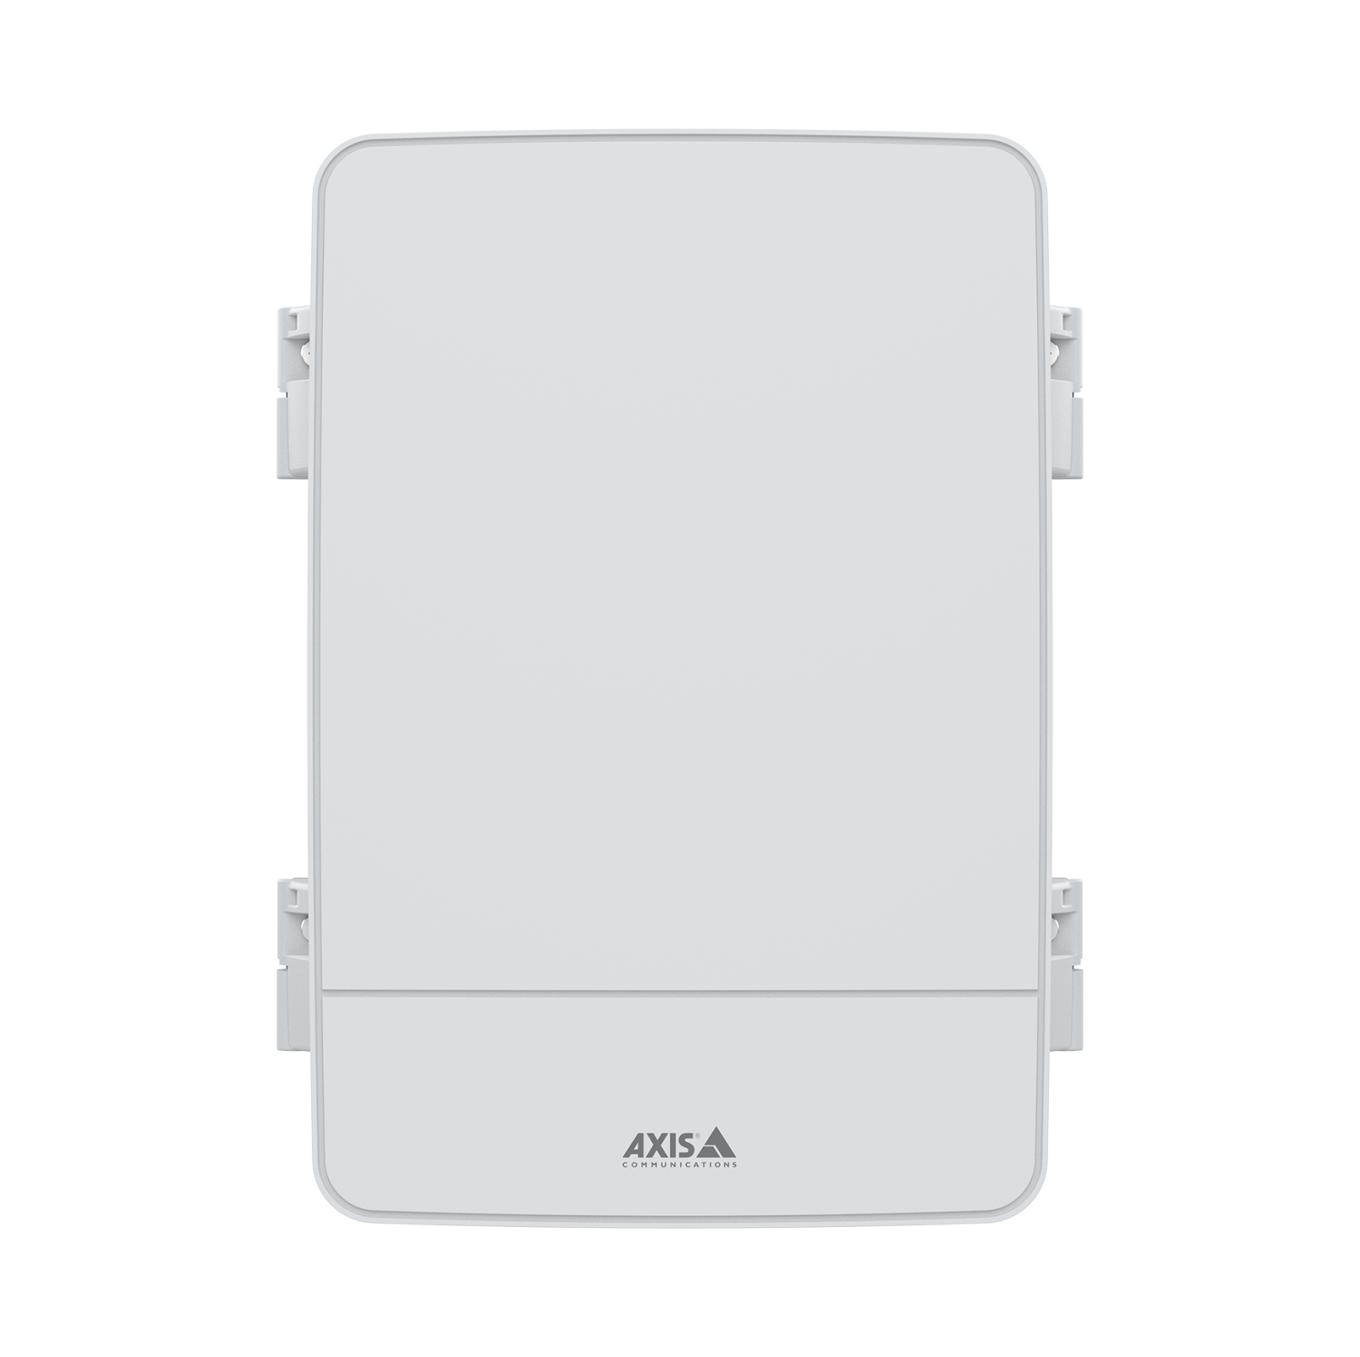 AXIS A1214 Network Door Controller Kit | Axis Communications